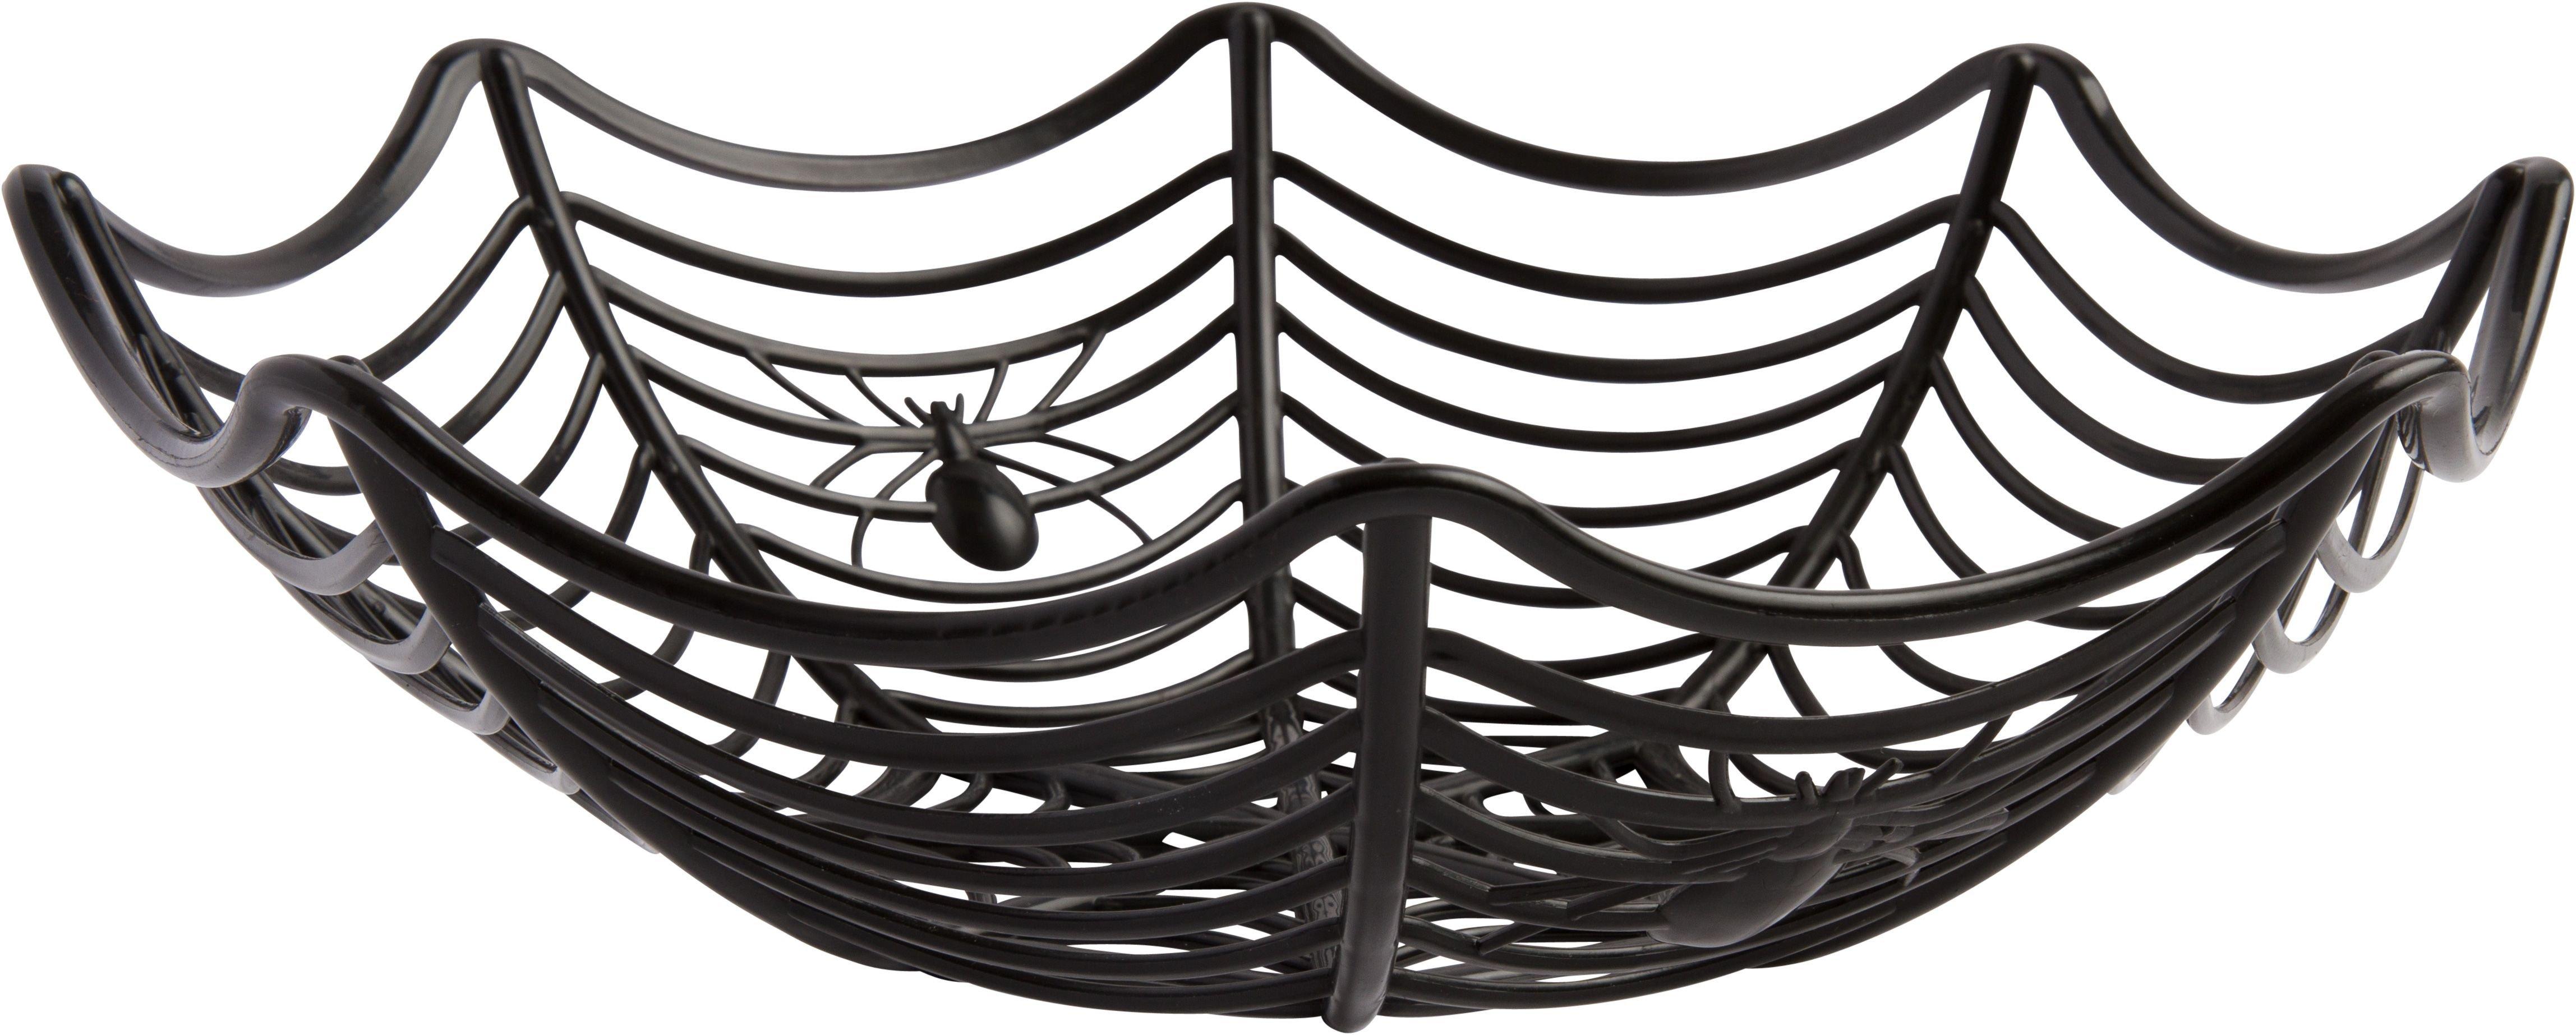 Spider Web Candy Bowl